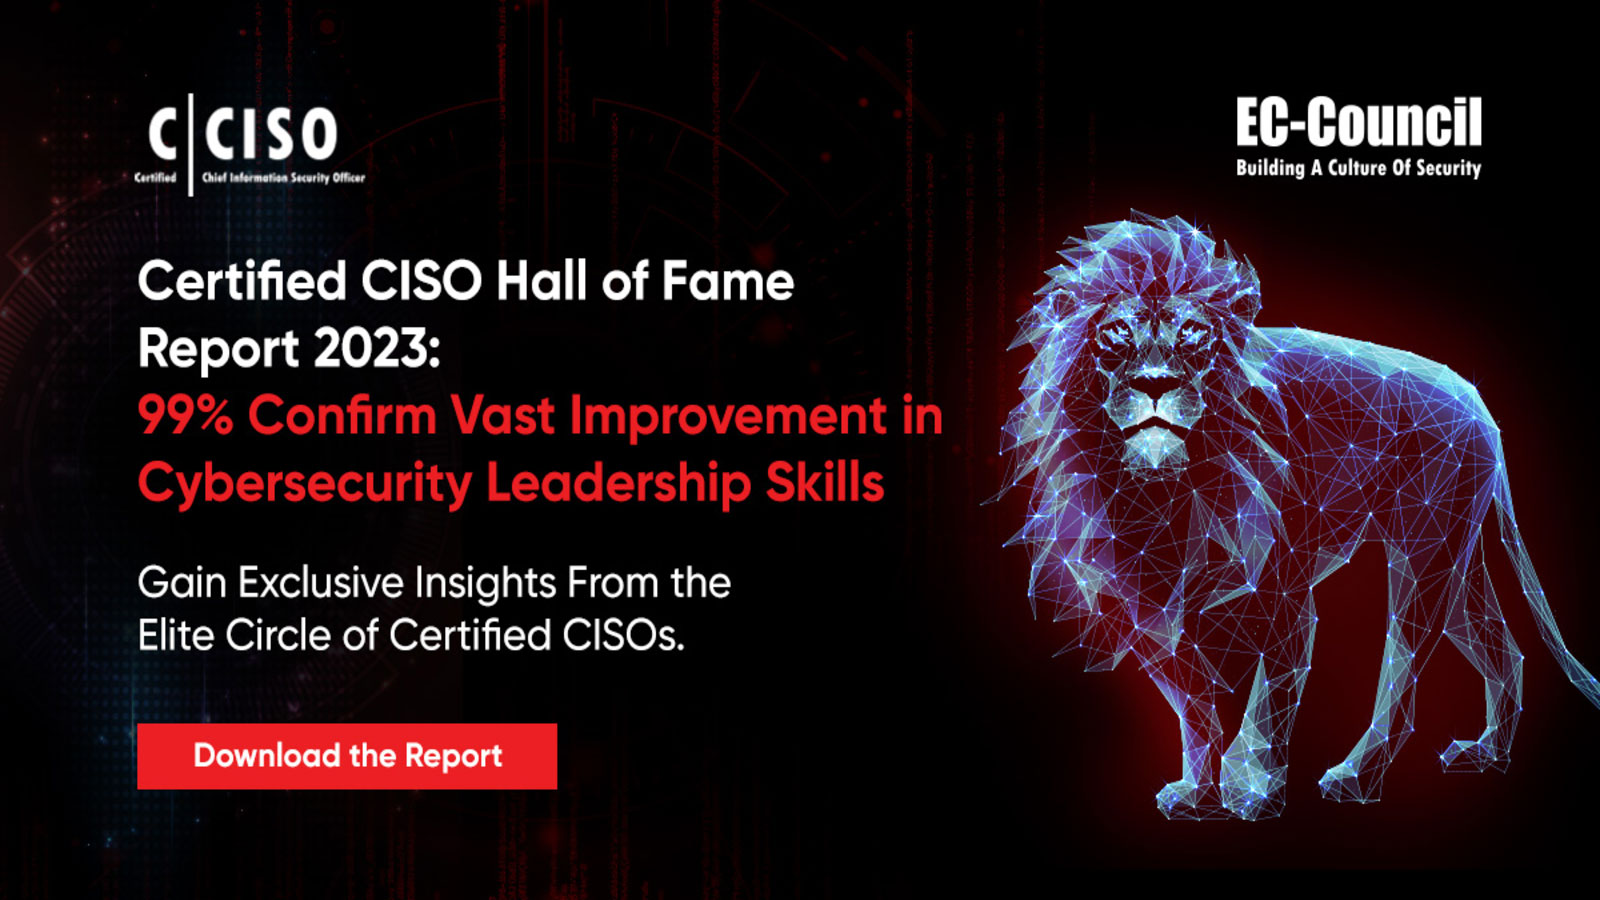 2023 Certified CISO Hall of Fame Report commissioned by EC-Council